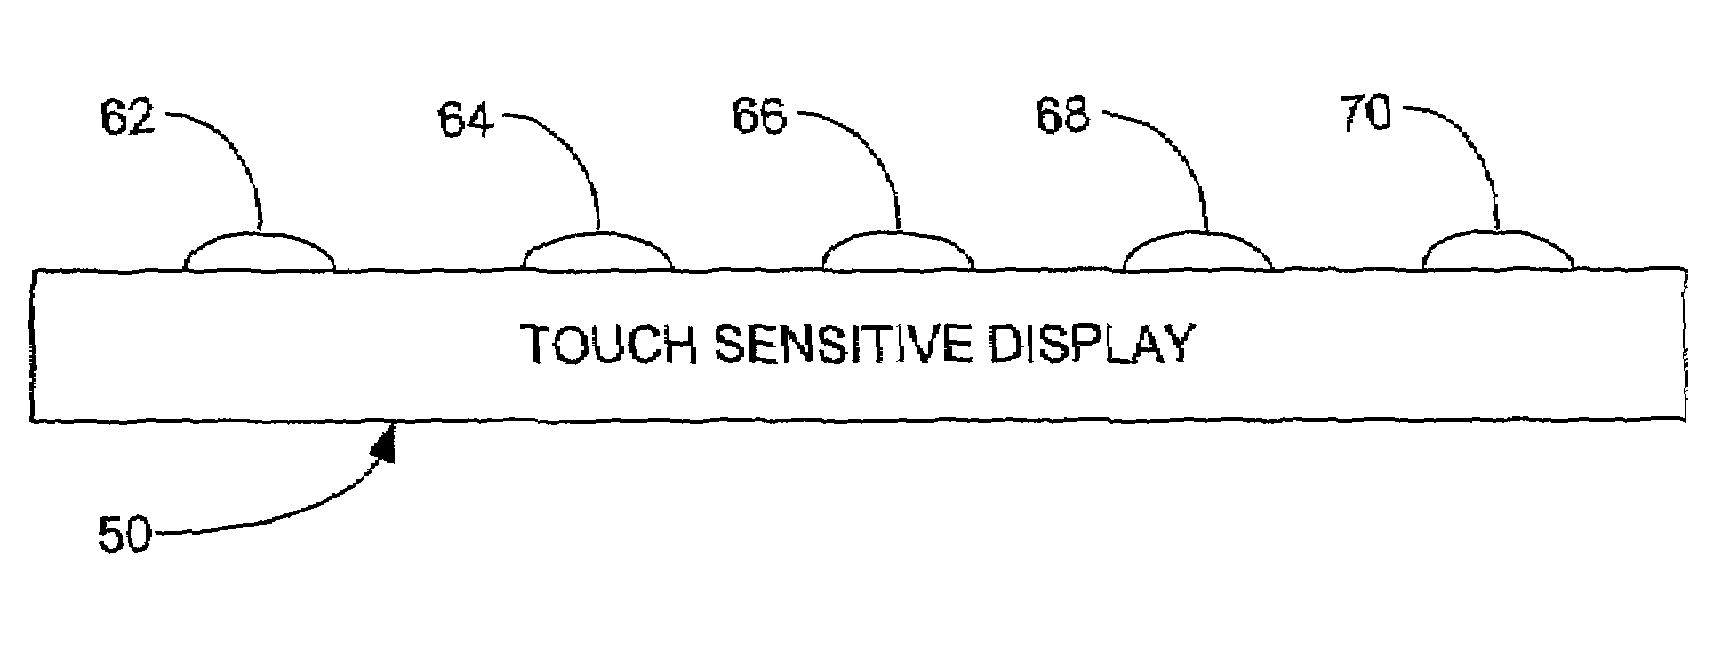 Graphic user interface having touch detectability